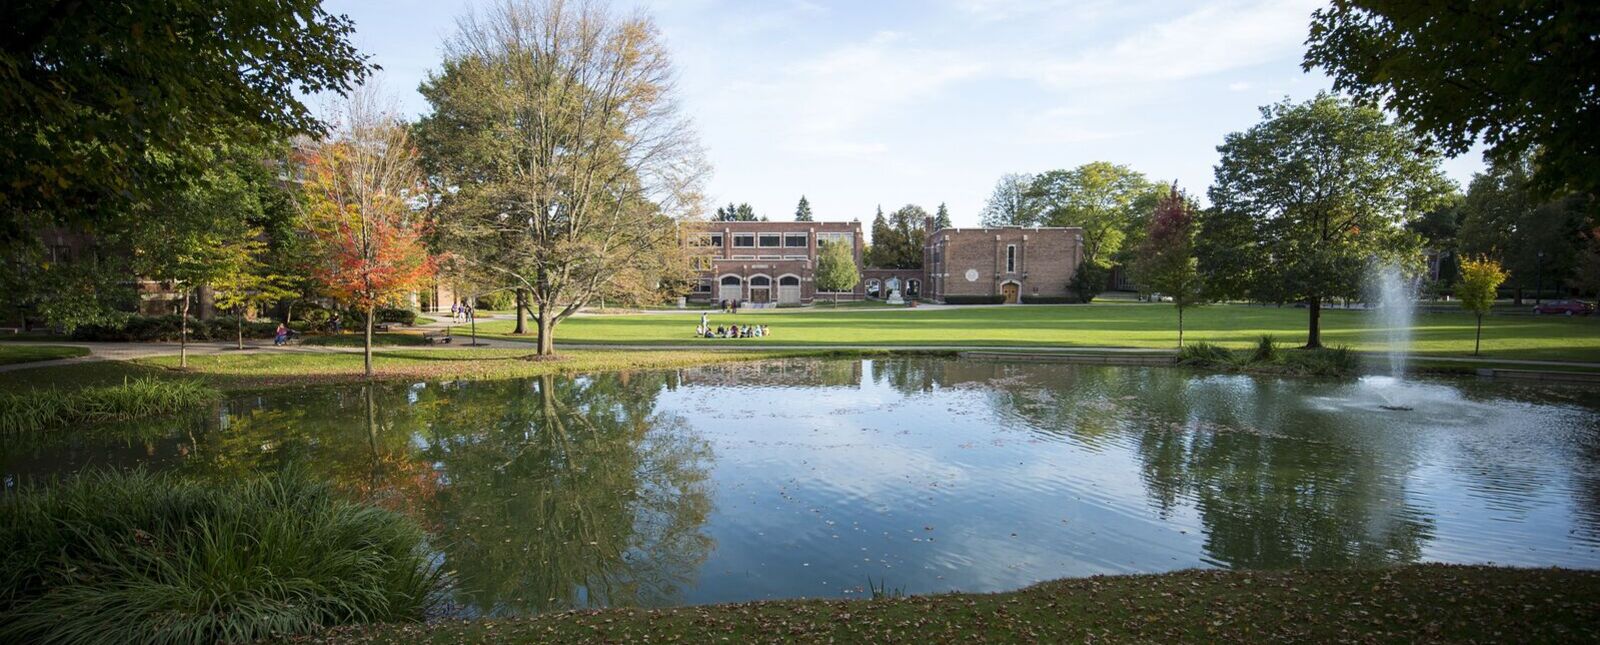 The Elmira College campus as seen from by The Pond